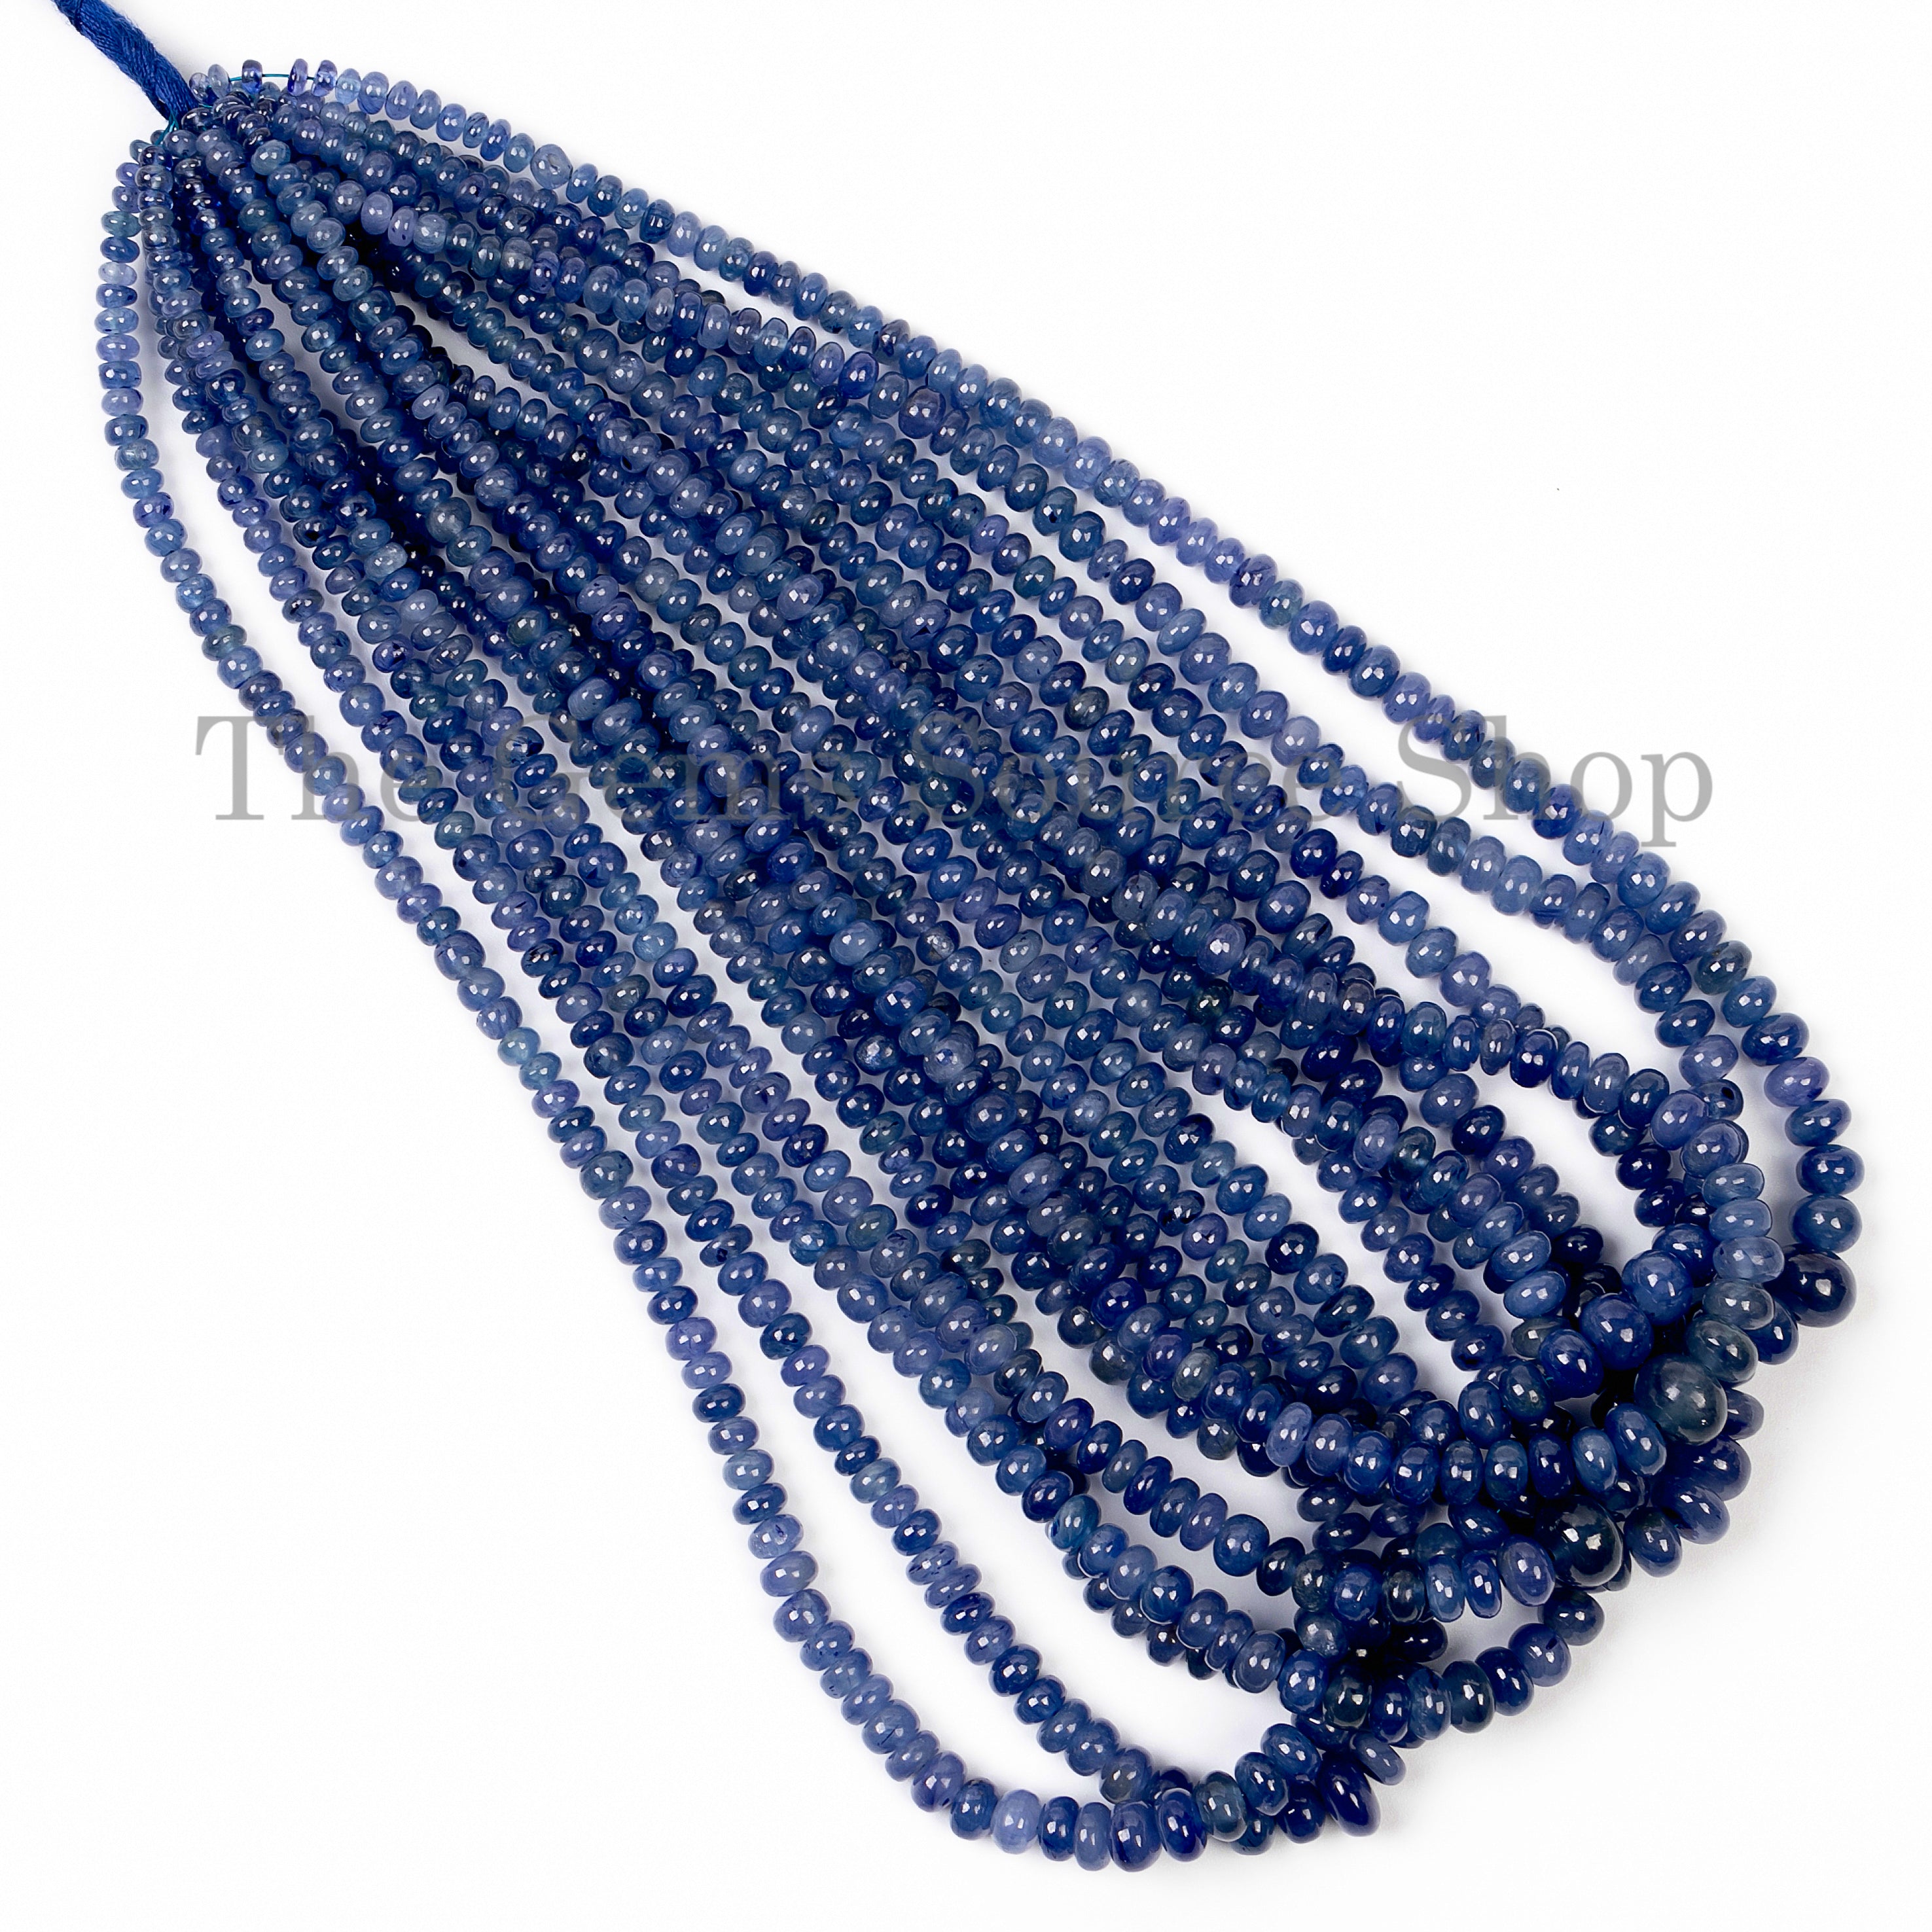 3-6 mm Blue Sapphire Smooth Rondelle Beads, Loose Sapphire Beads TGS-5030